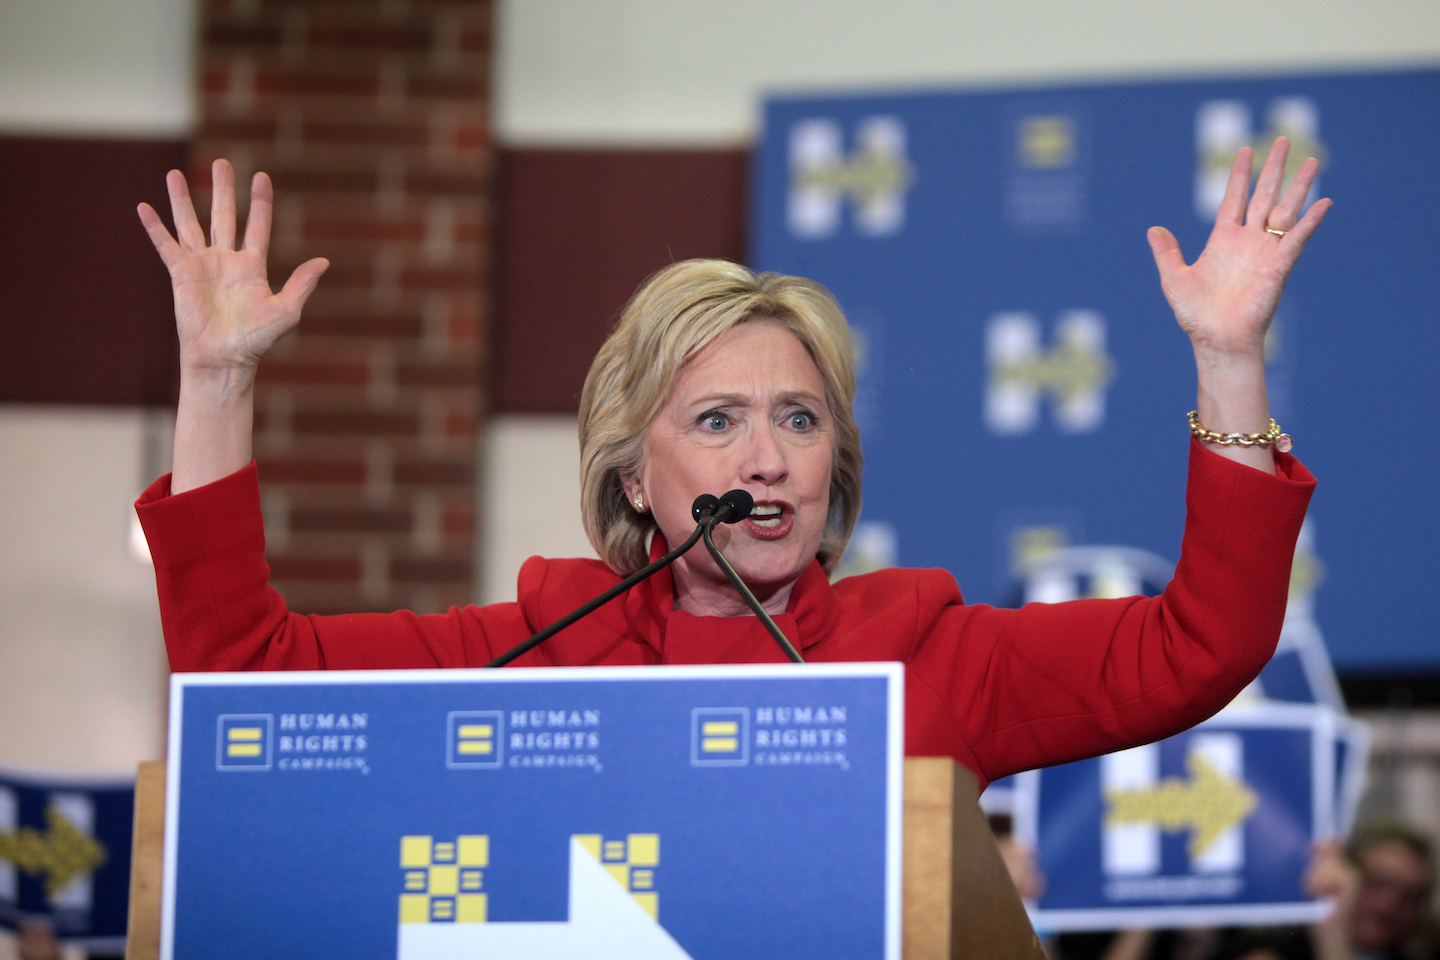 Image: Why Hillary Clinton’s fact-less ‘feminist arguments’ are anything BUT women’s rights